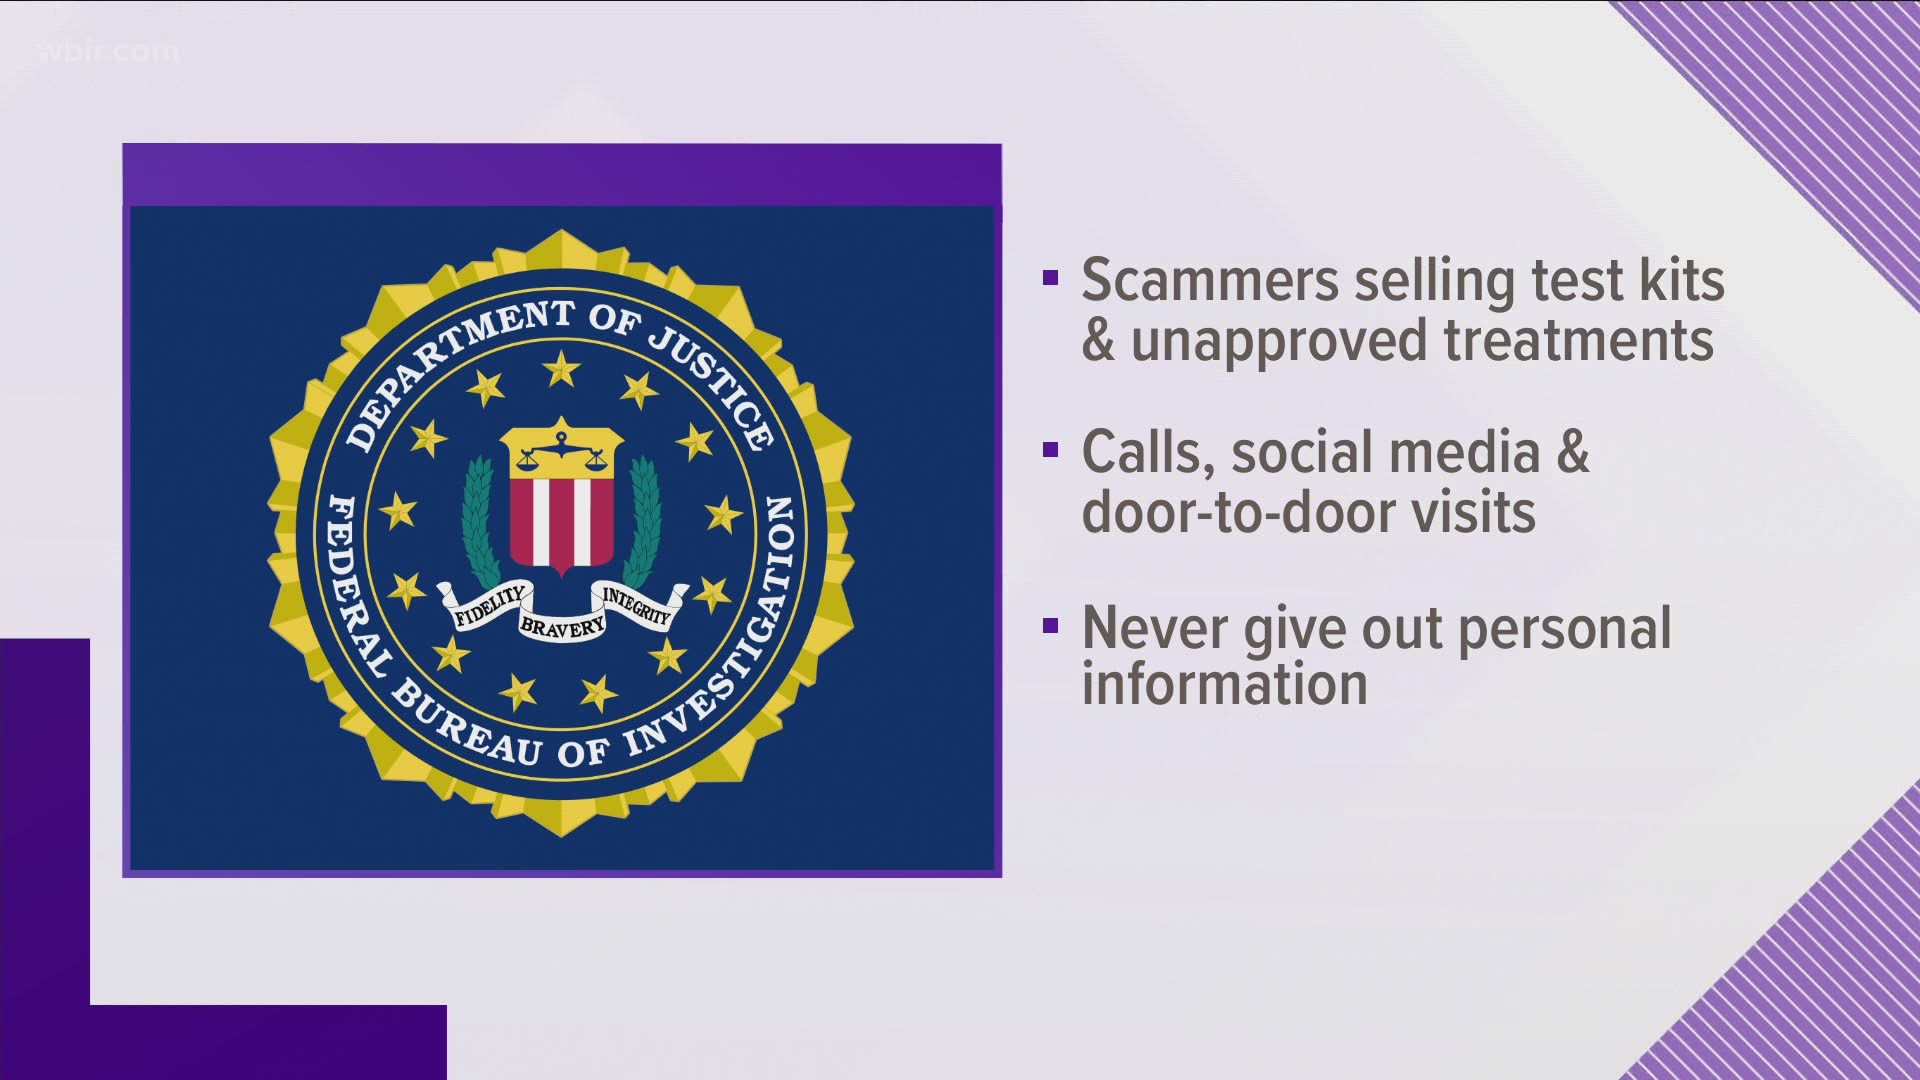 The FBI is issuing new warnings about scammers trying to get your money or personal information through COVID-19 schemes.